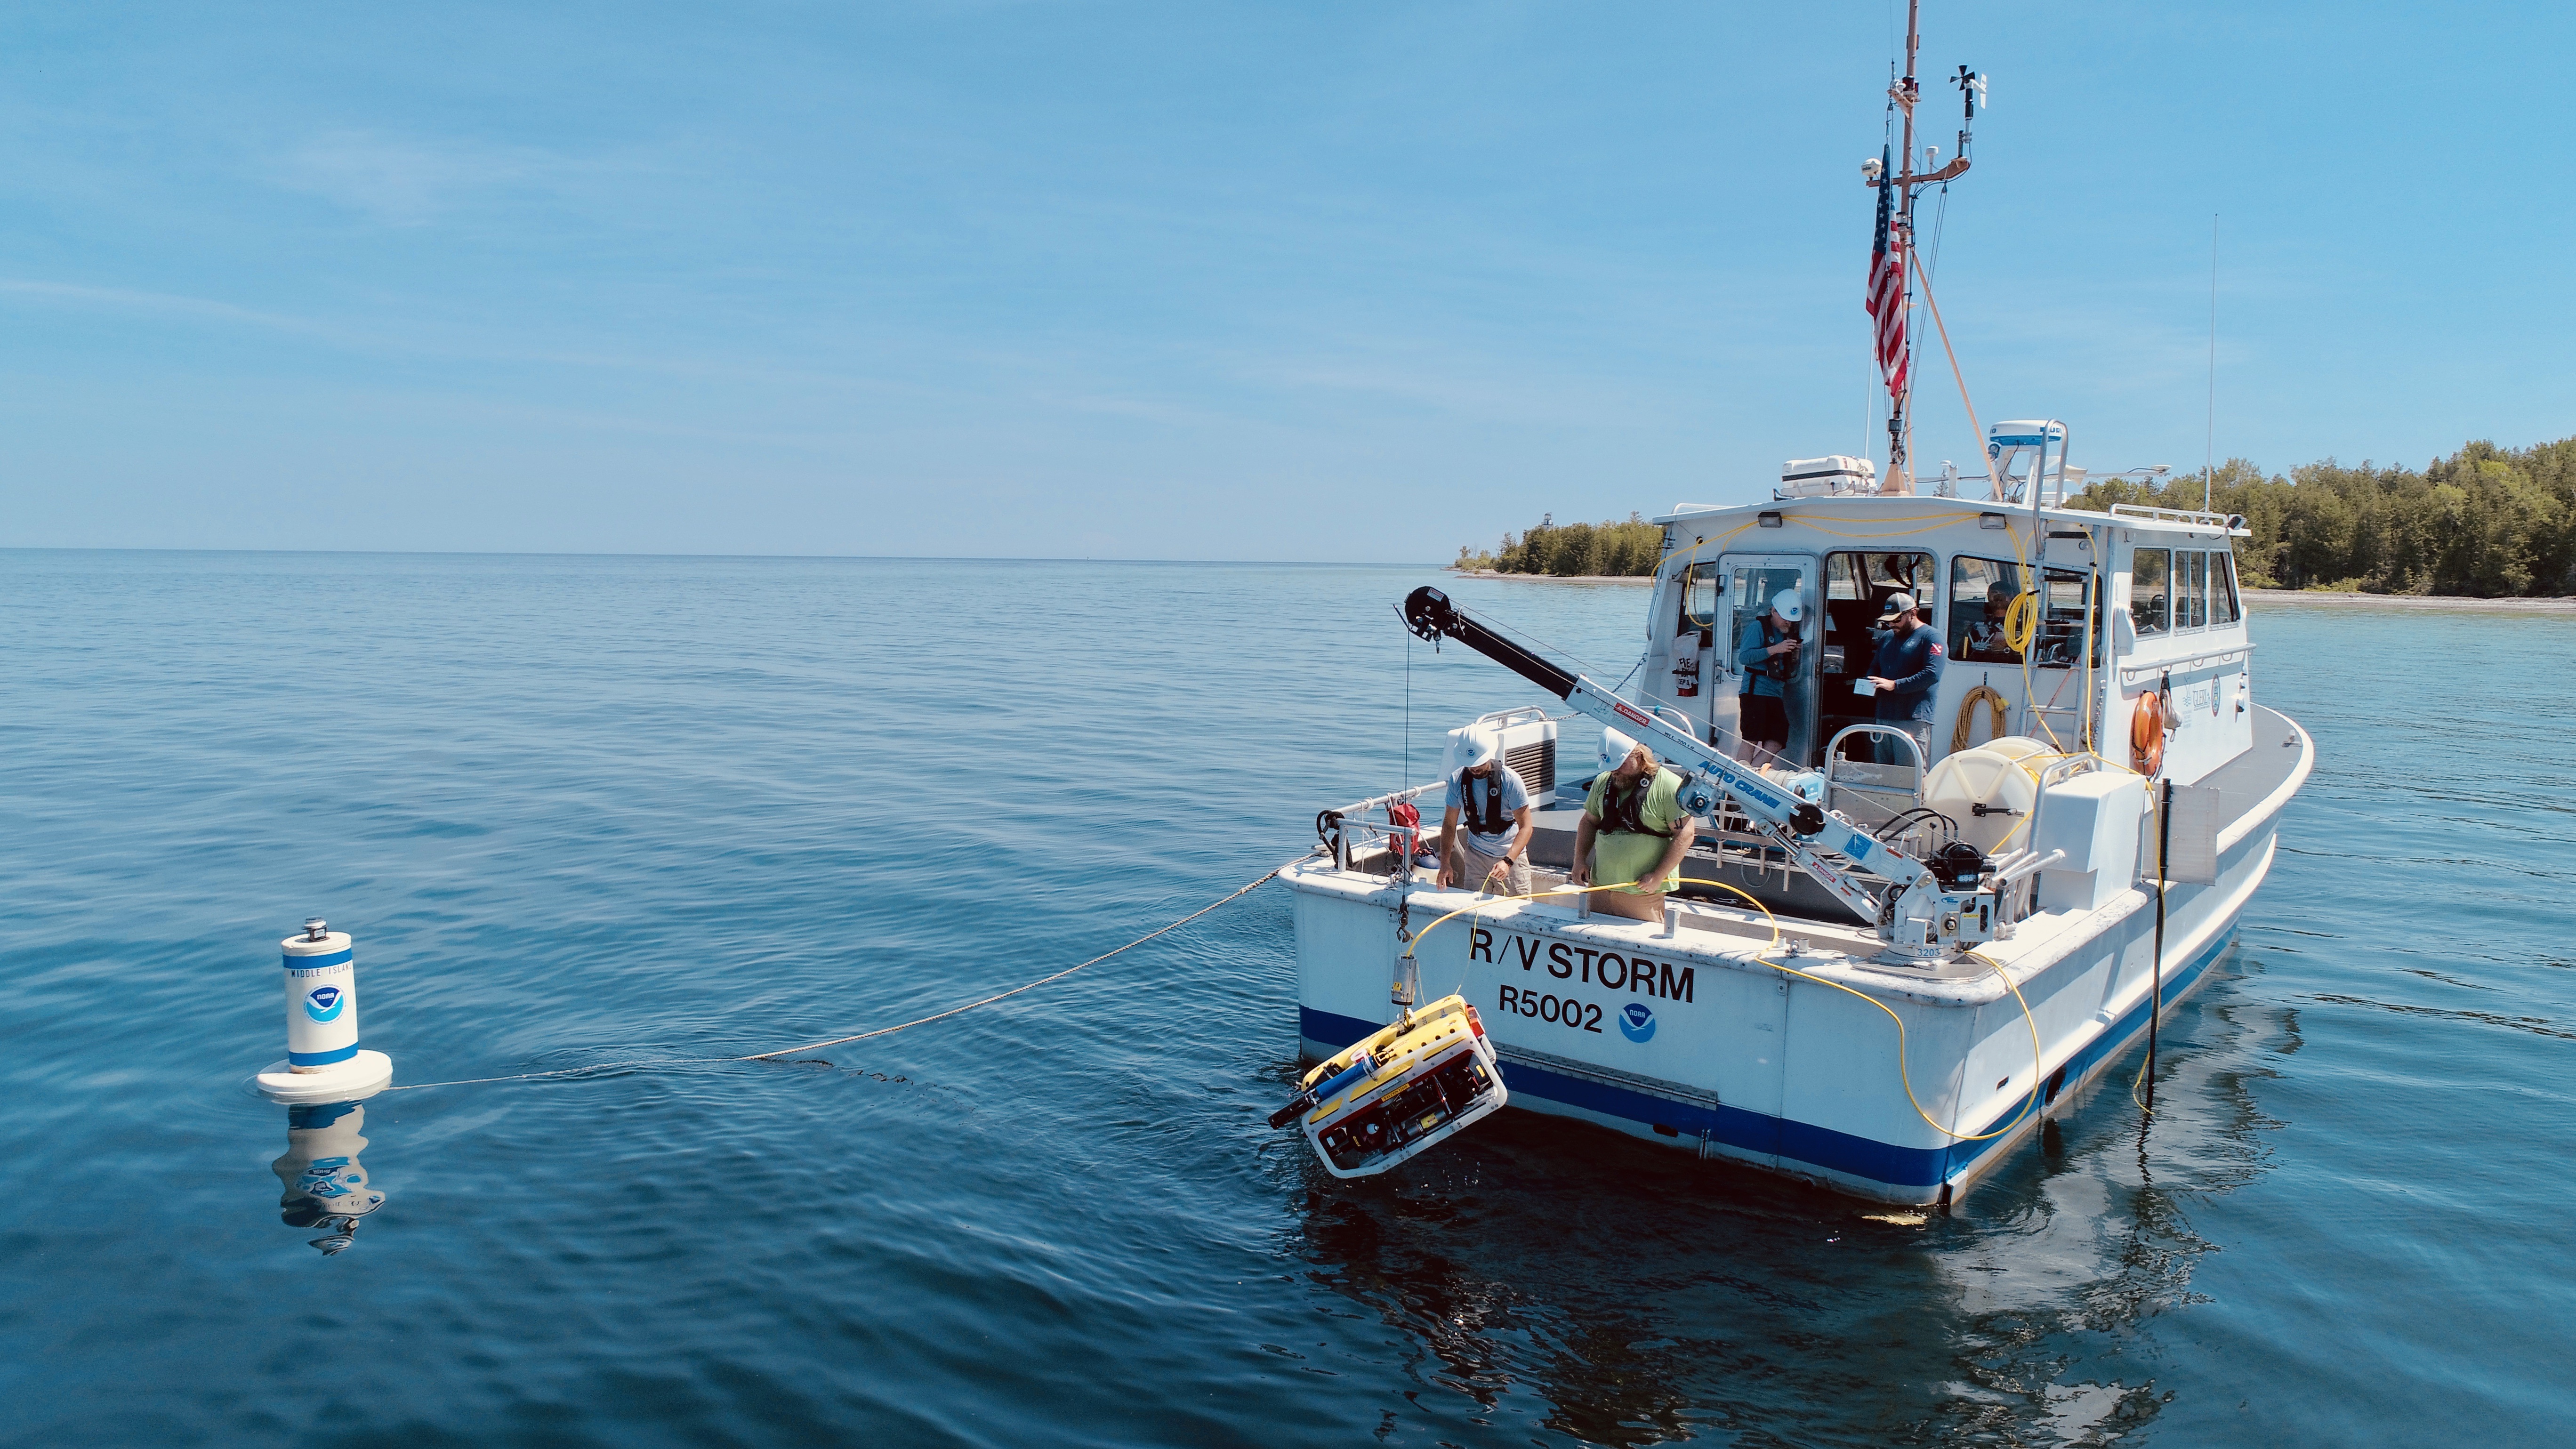 Researchers deploy a remotely operated vehicle to install flow meters at the Middle Island Sinkhole in Lake Huron, July 17, 2019. The flow meters will help researchers determine how much groundwater the sinkhole is contributing to the lake.